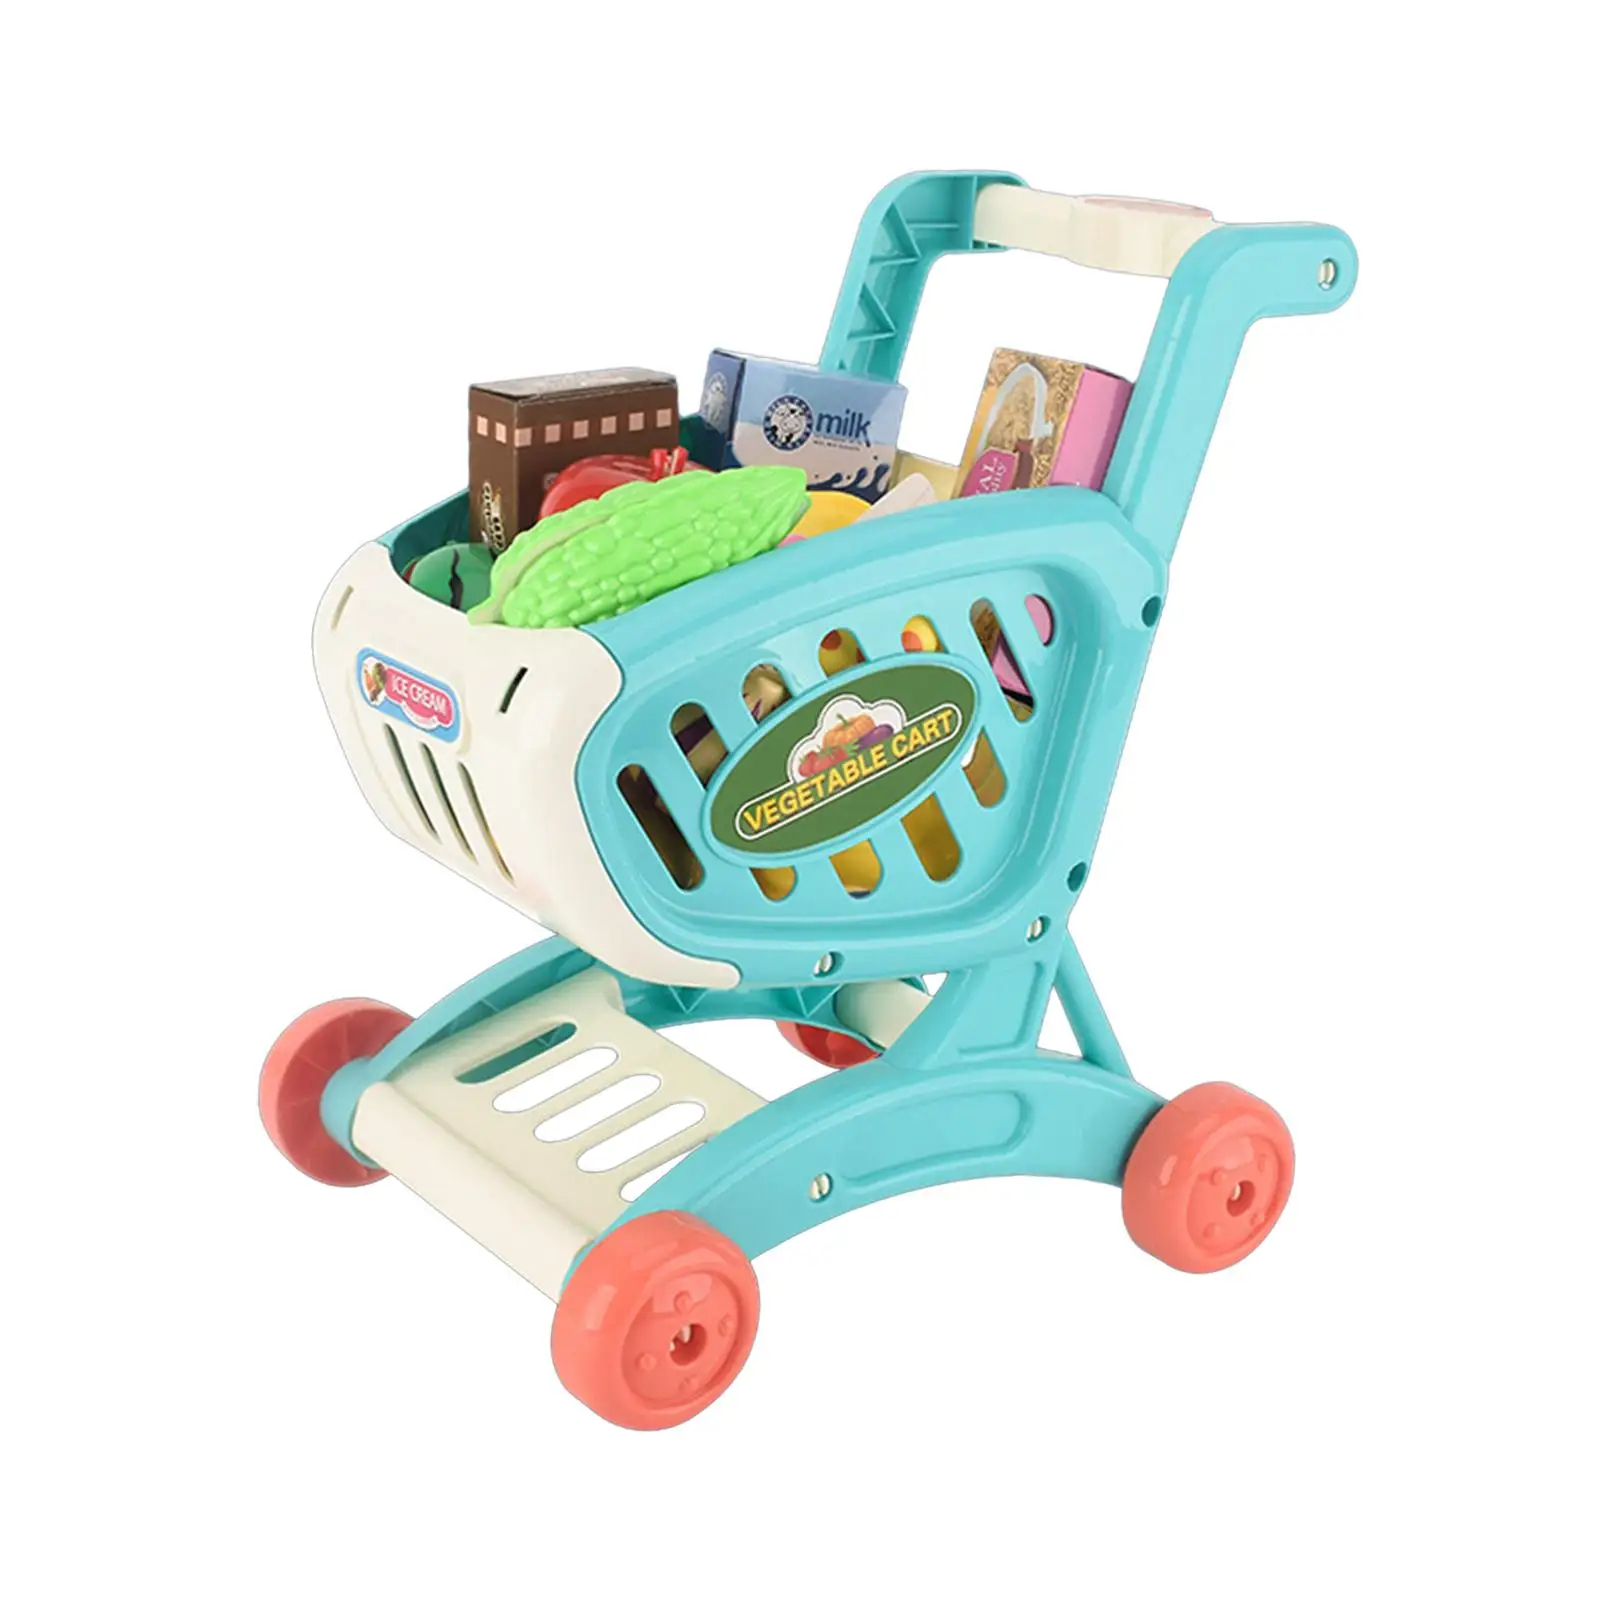 Mini Shopping Cart Toy Funny for Girls and Boys Preschool Ages 3 and up